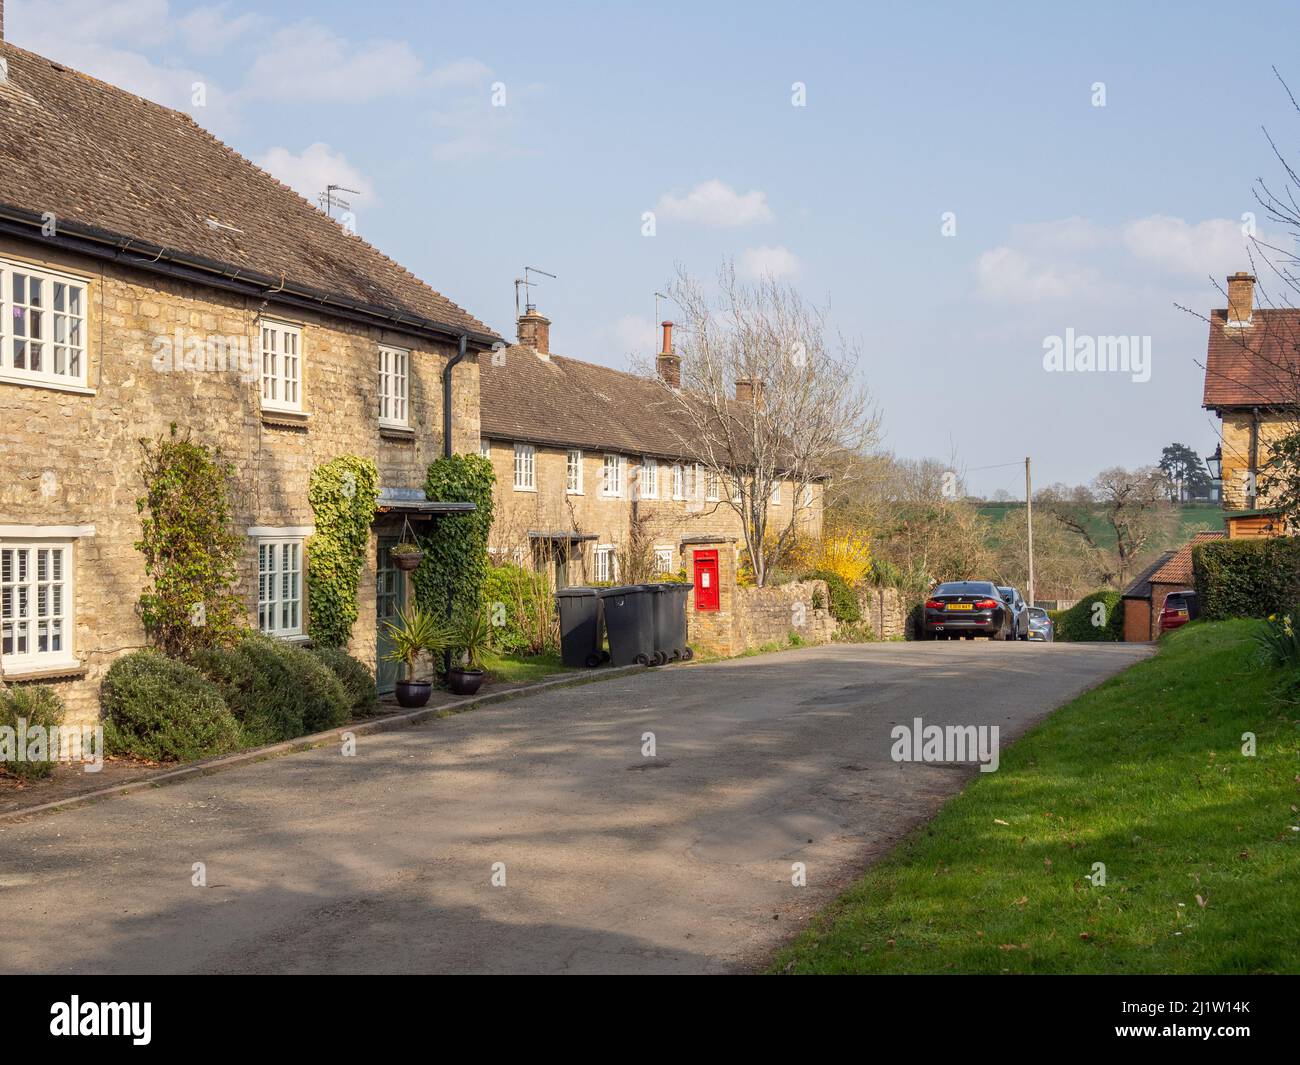 Street view in Spring in the attractive hamlet of Courteenhall, Northamptonshire, UK Stock Photo